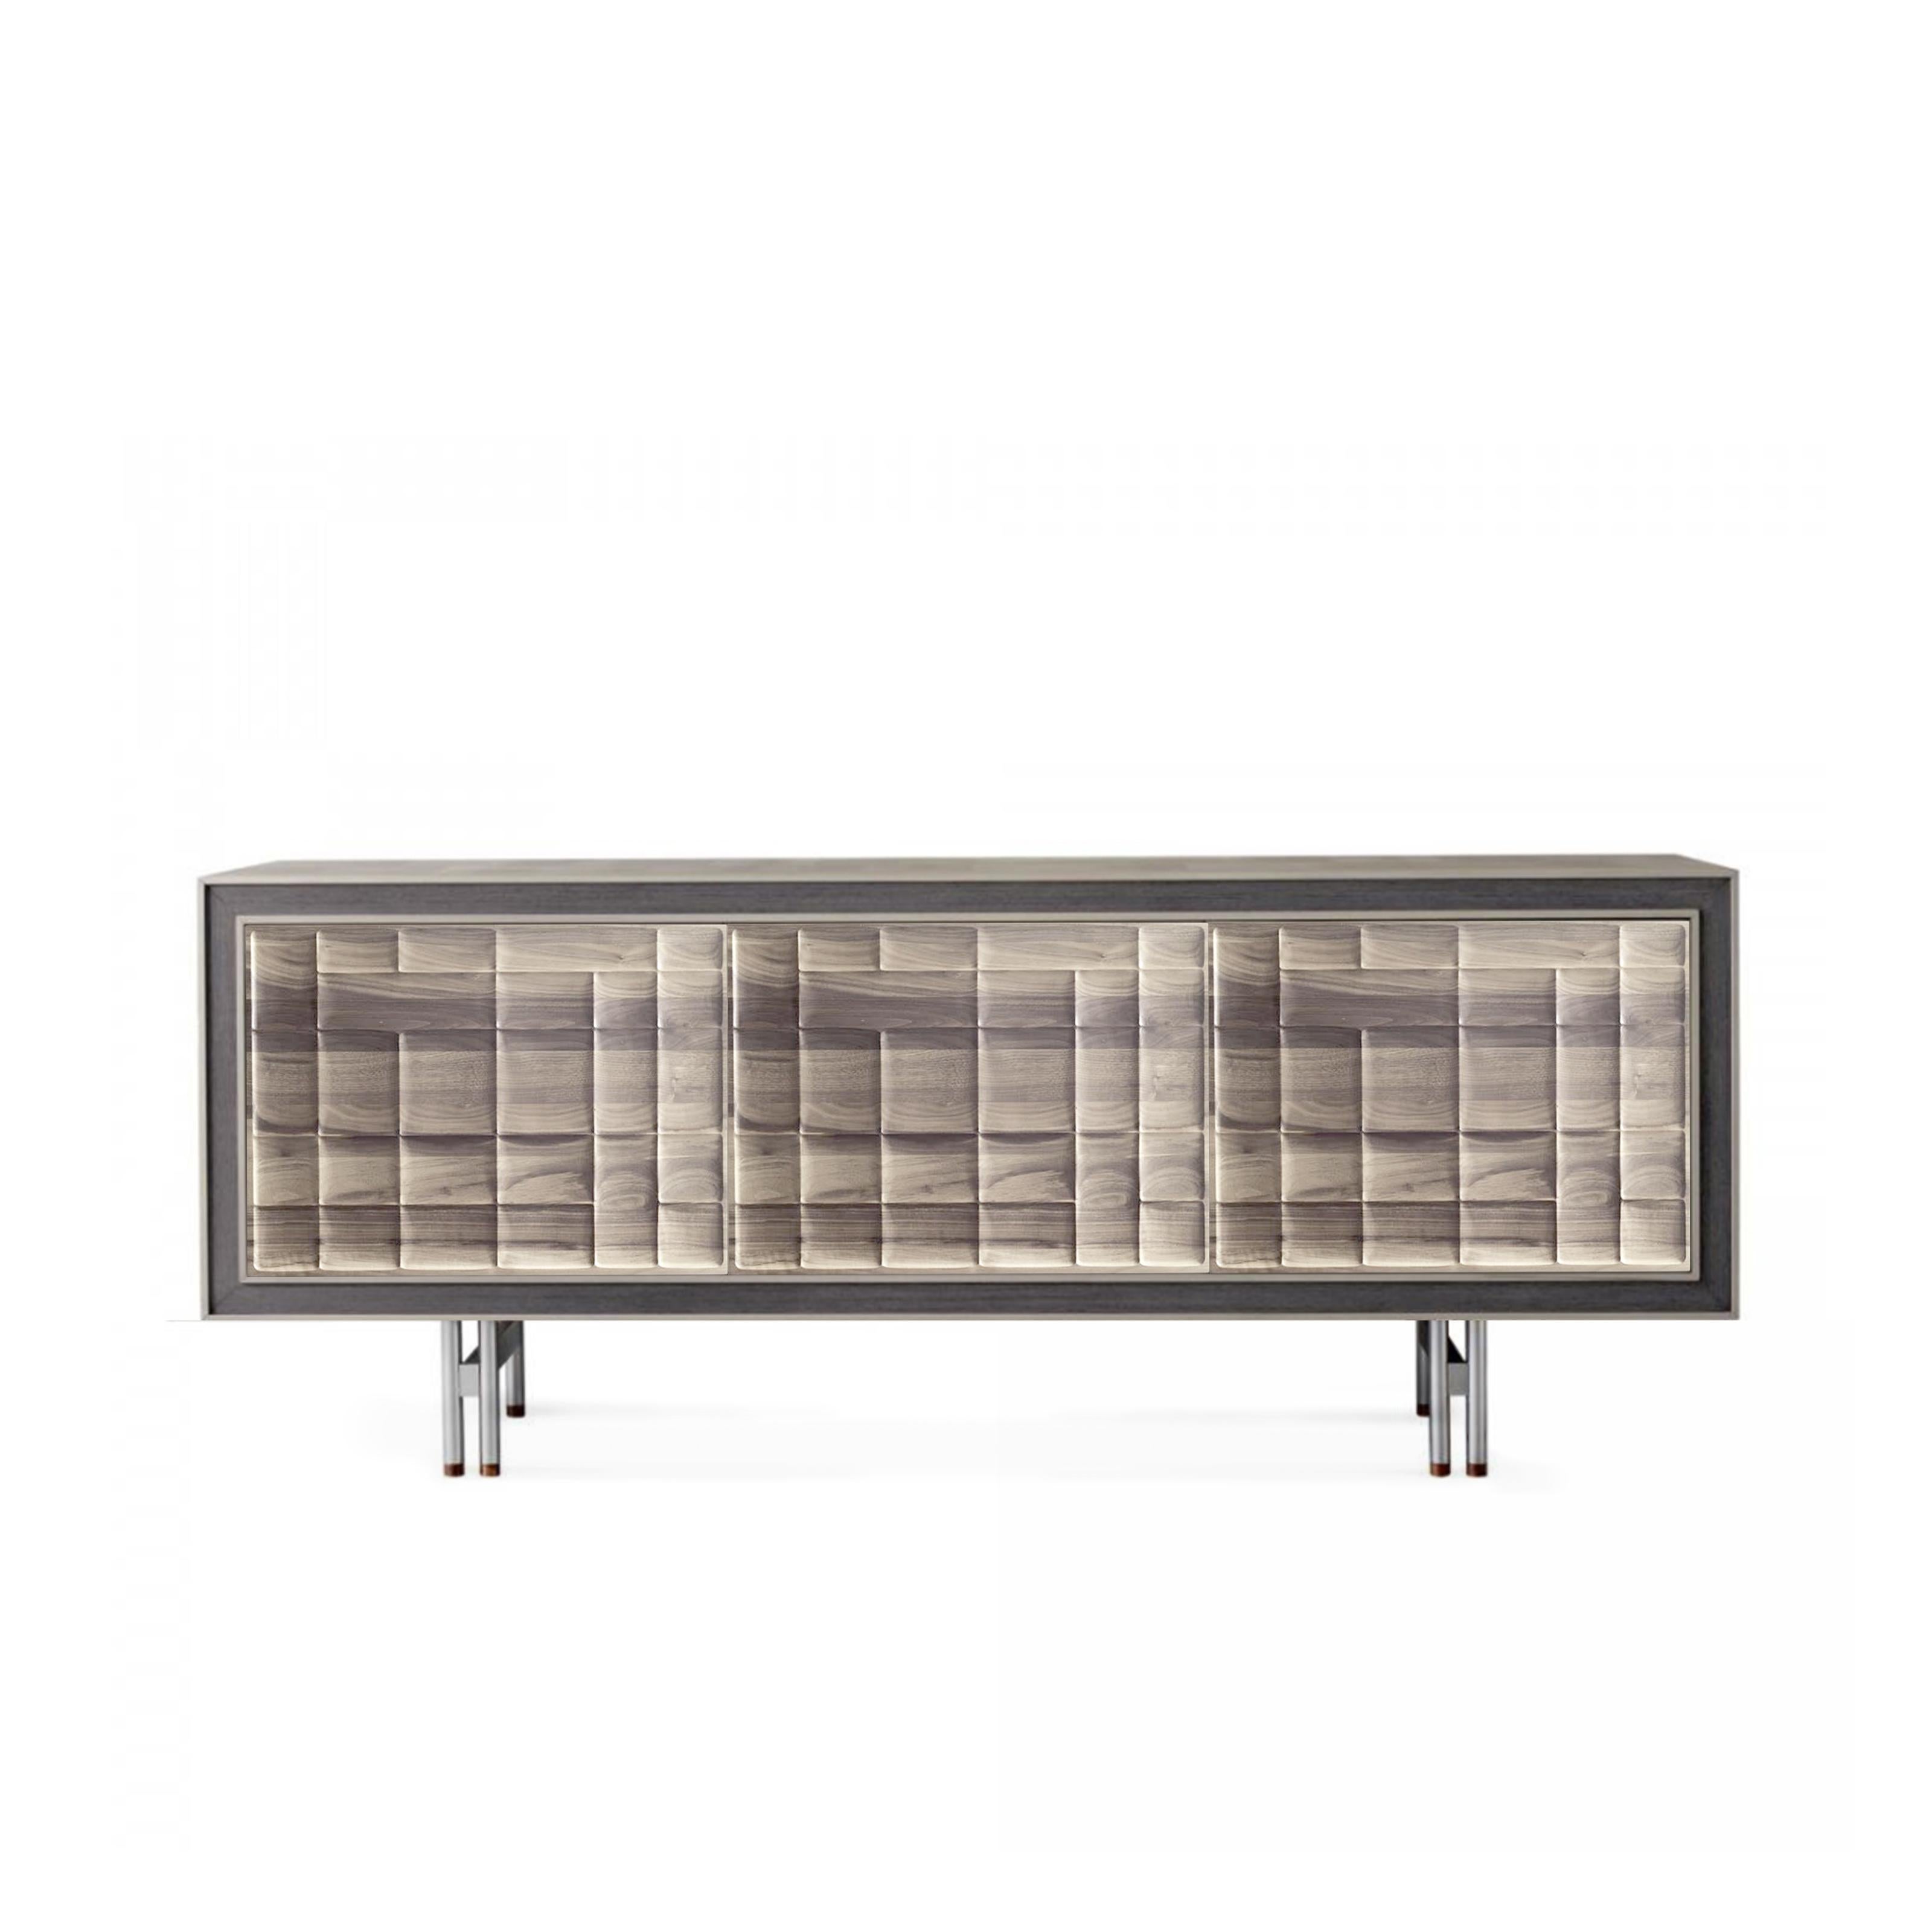 Oiled Quadra Scacco Solid Wood Sideboard, Walnut in Natural Grey Finish, Contemporary For Sale